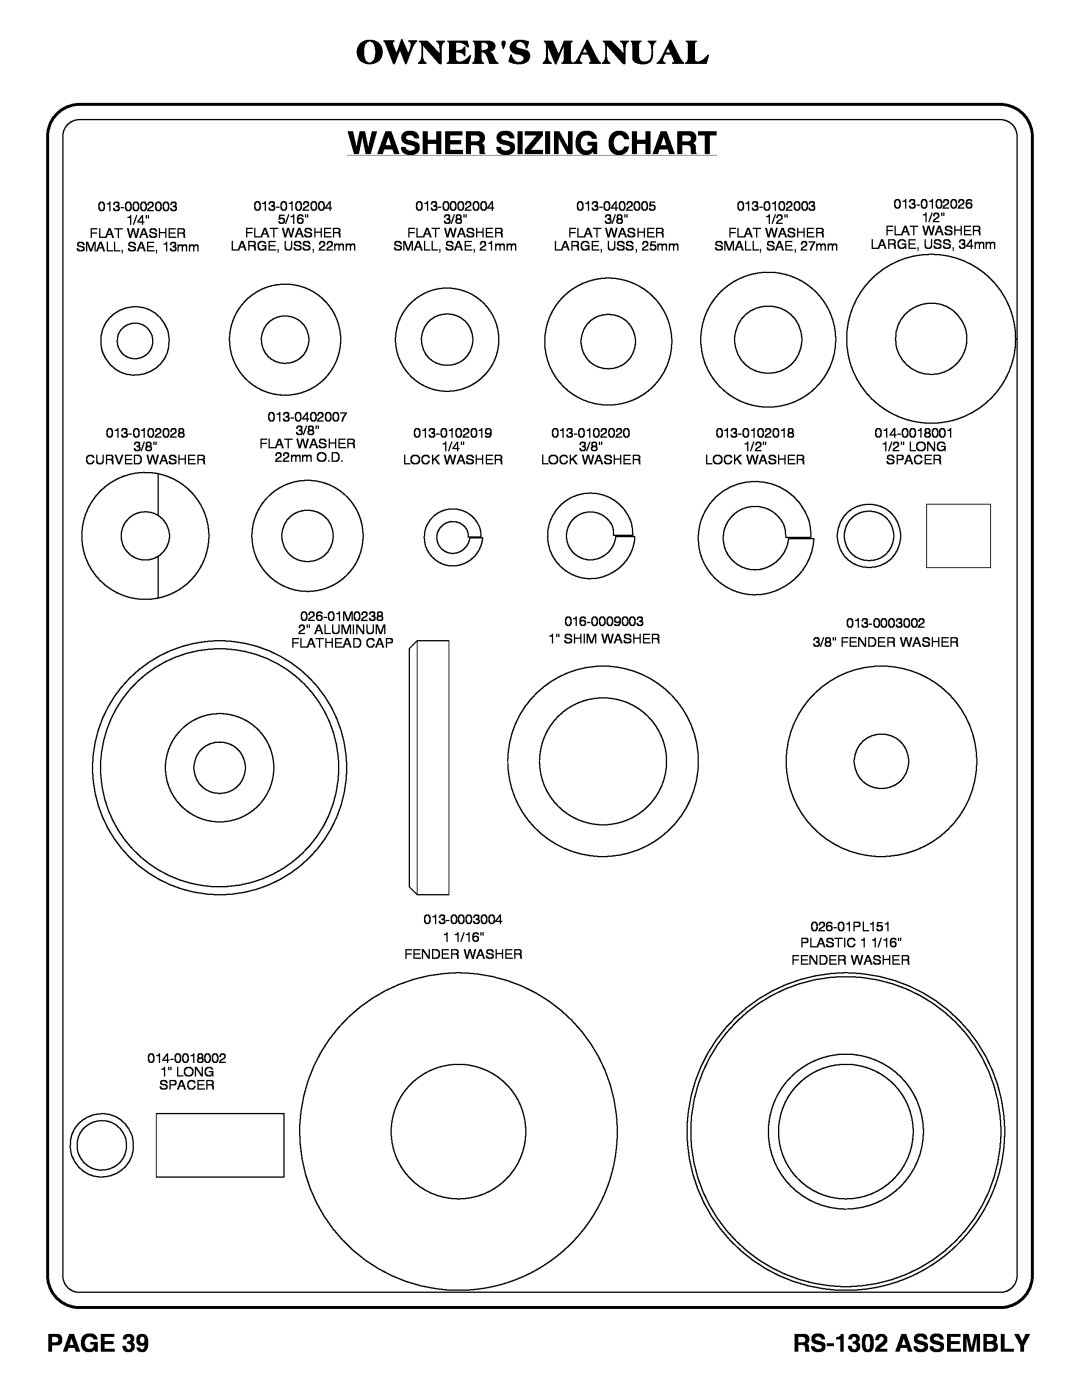 Hoist Fitness owner manual Owners Manual Washer Sizing Chart, RS-1302 ASSEMBLY 